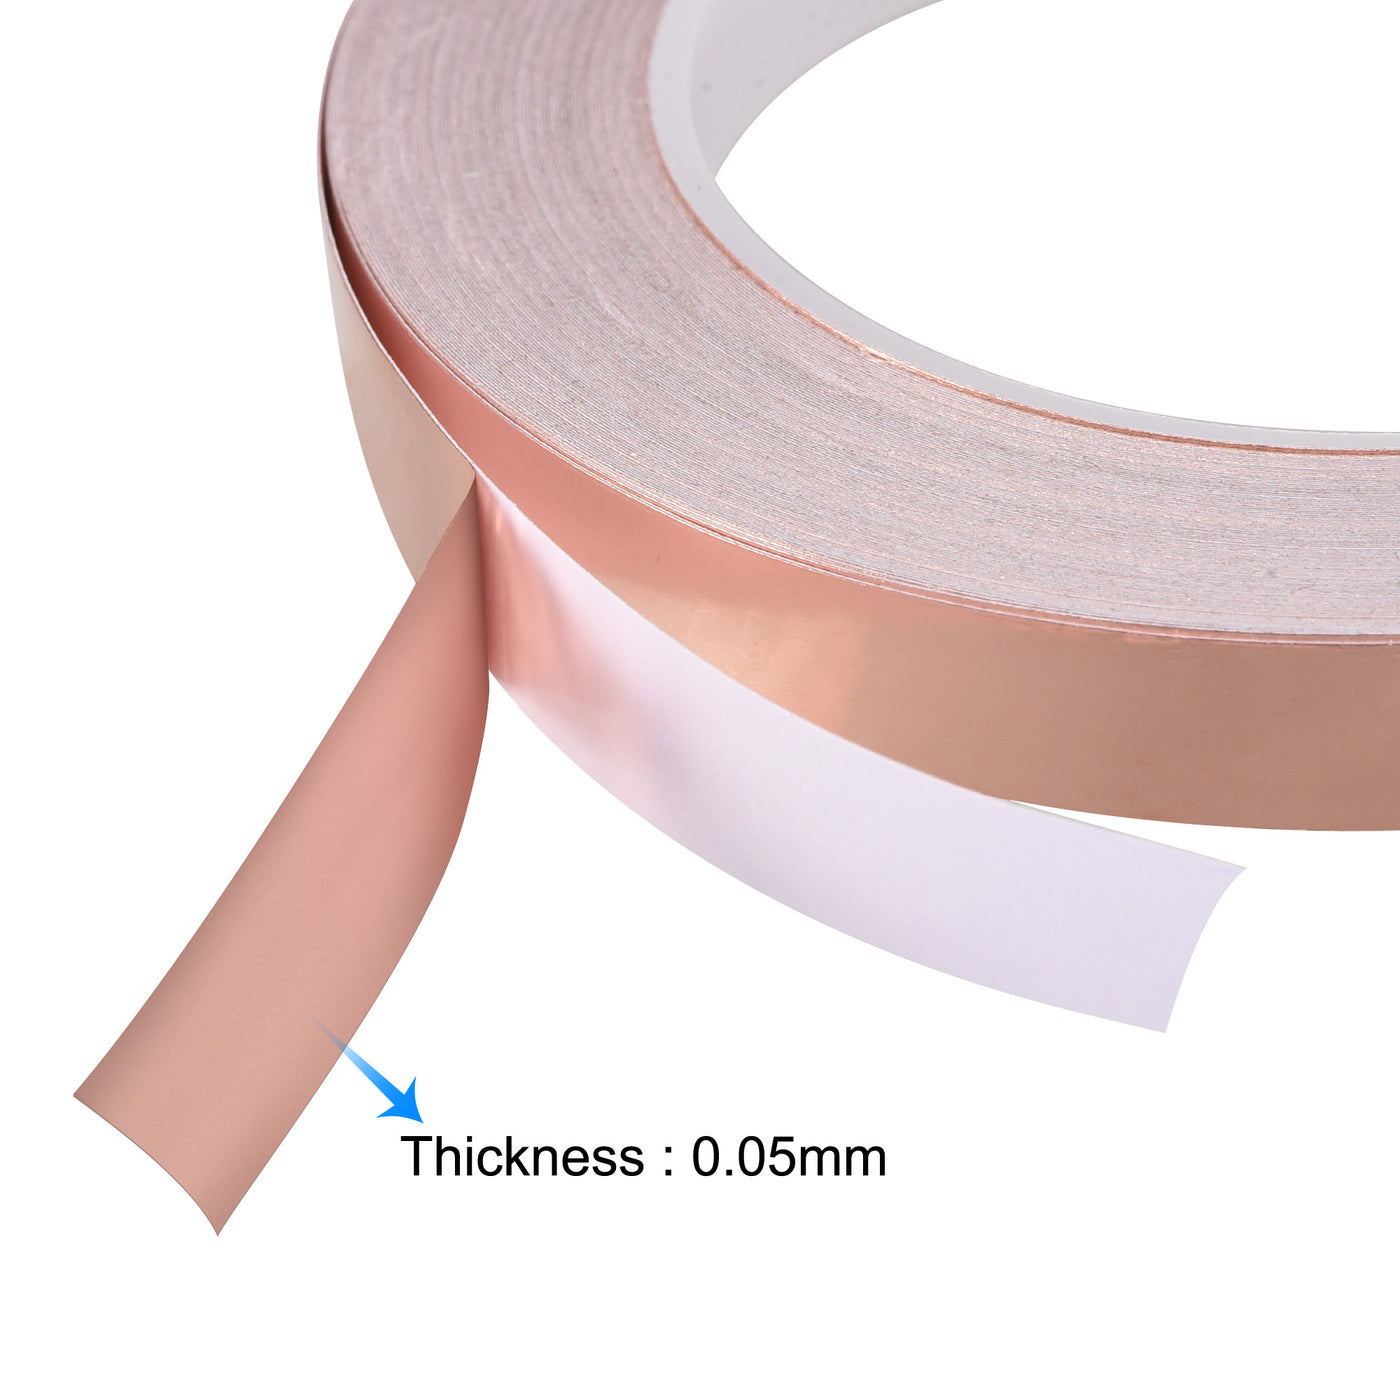 uxcell Uxcell Single-Sided Conductive Tape Copper Foil Tape 15mm x 30m/98.4ft 2pcs